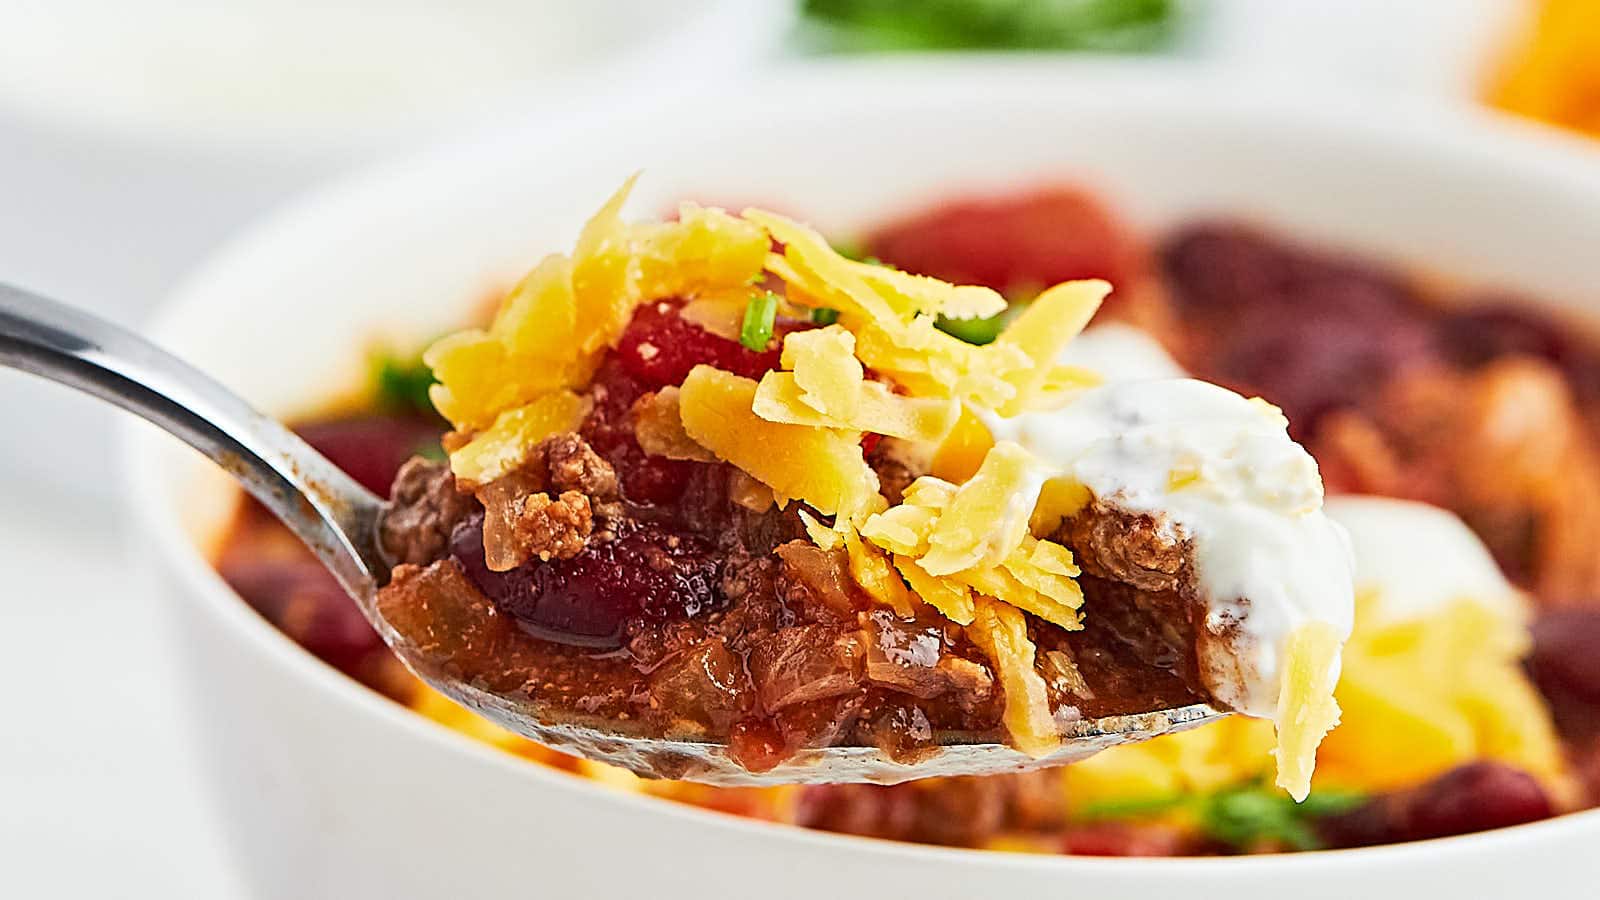 Classic Beef Chili recipe by Cheerful Cook.